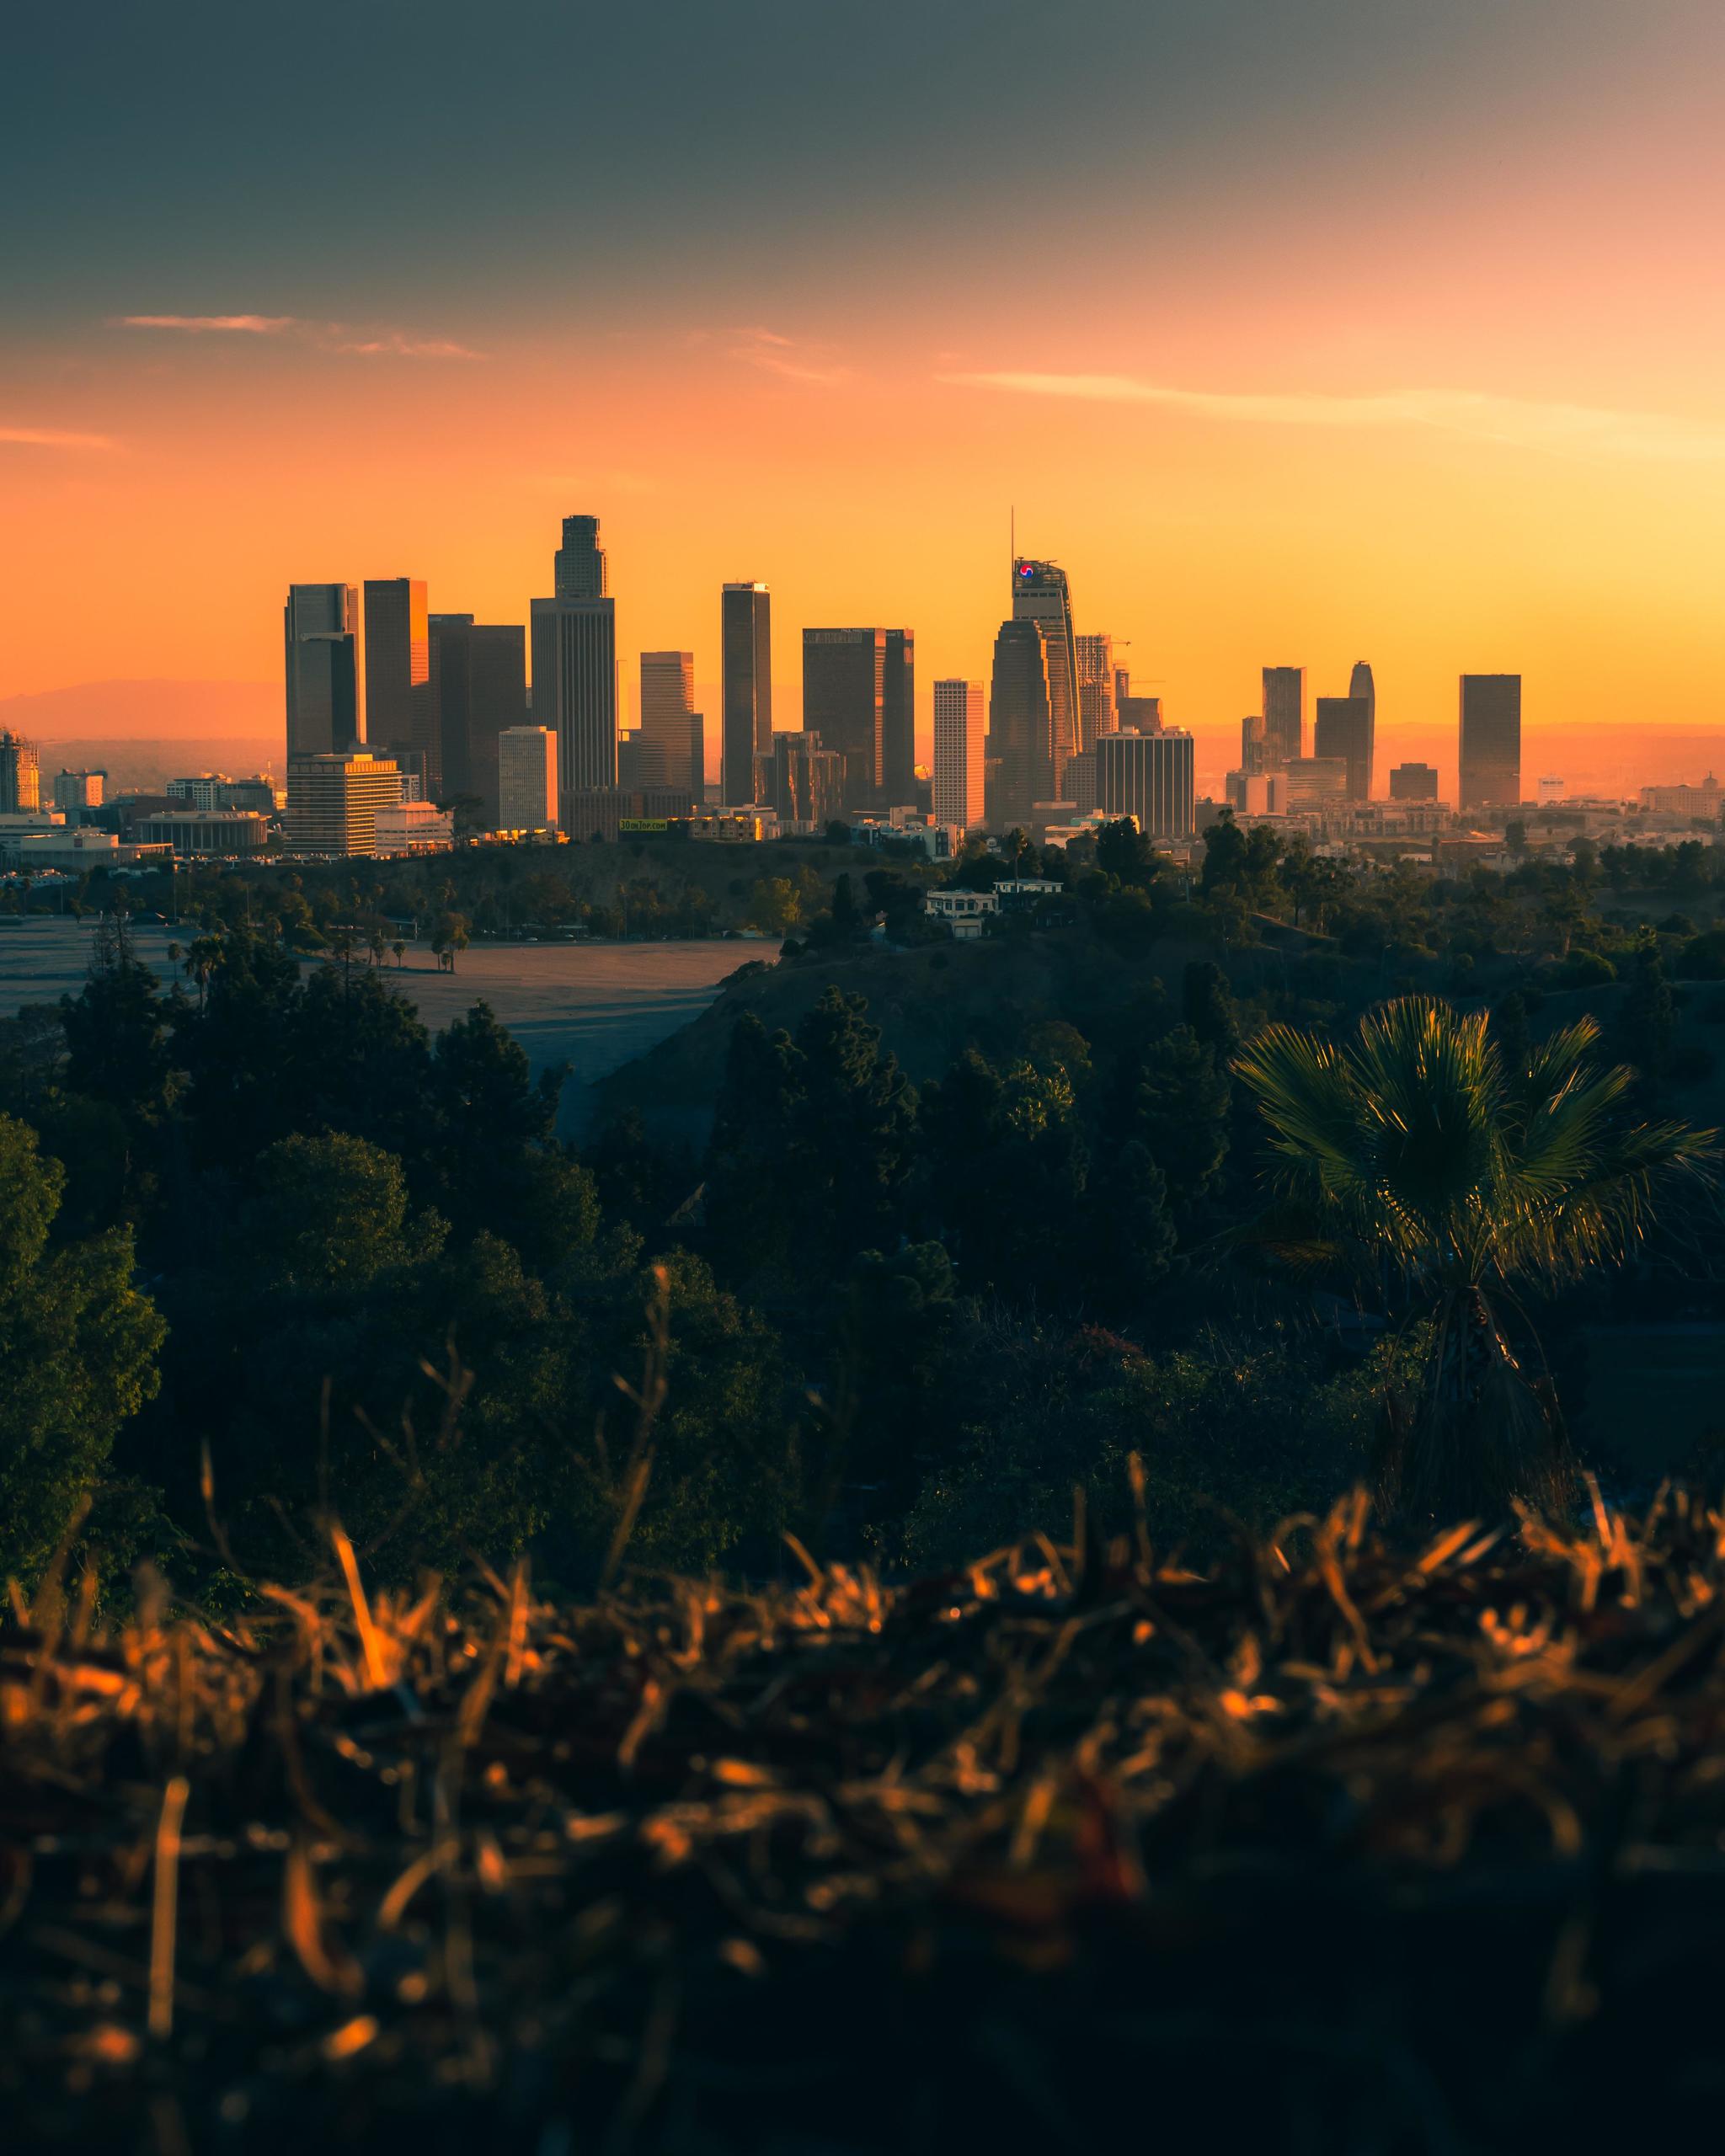 Sunset in Los Angeles without smog - The photo, USA, Los Angeles, Air, Sunset, Evening